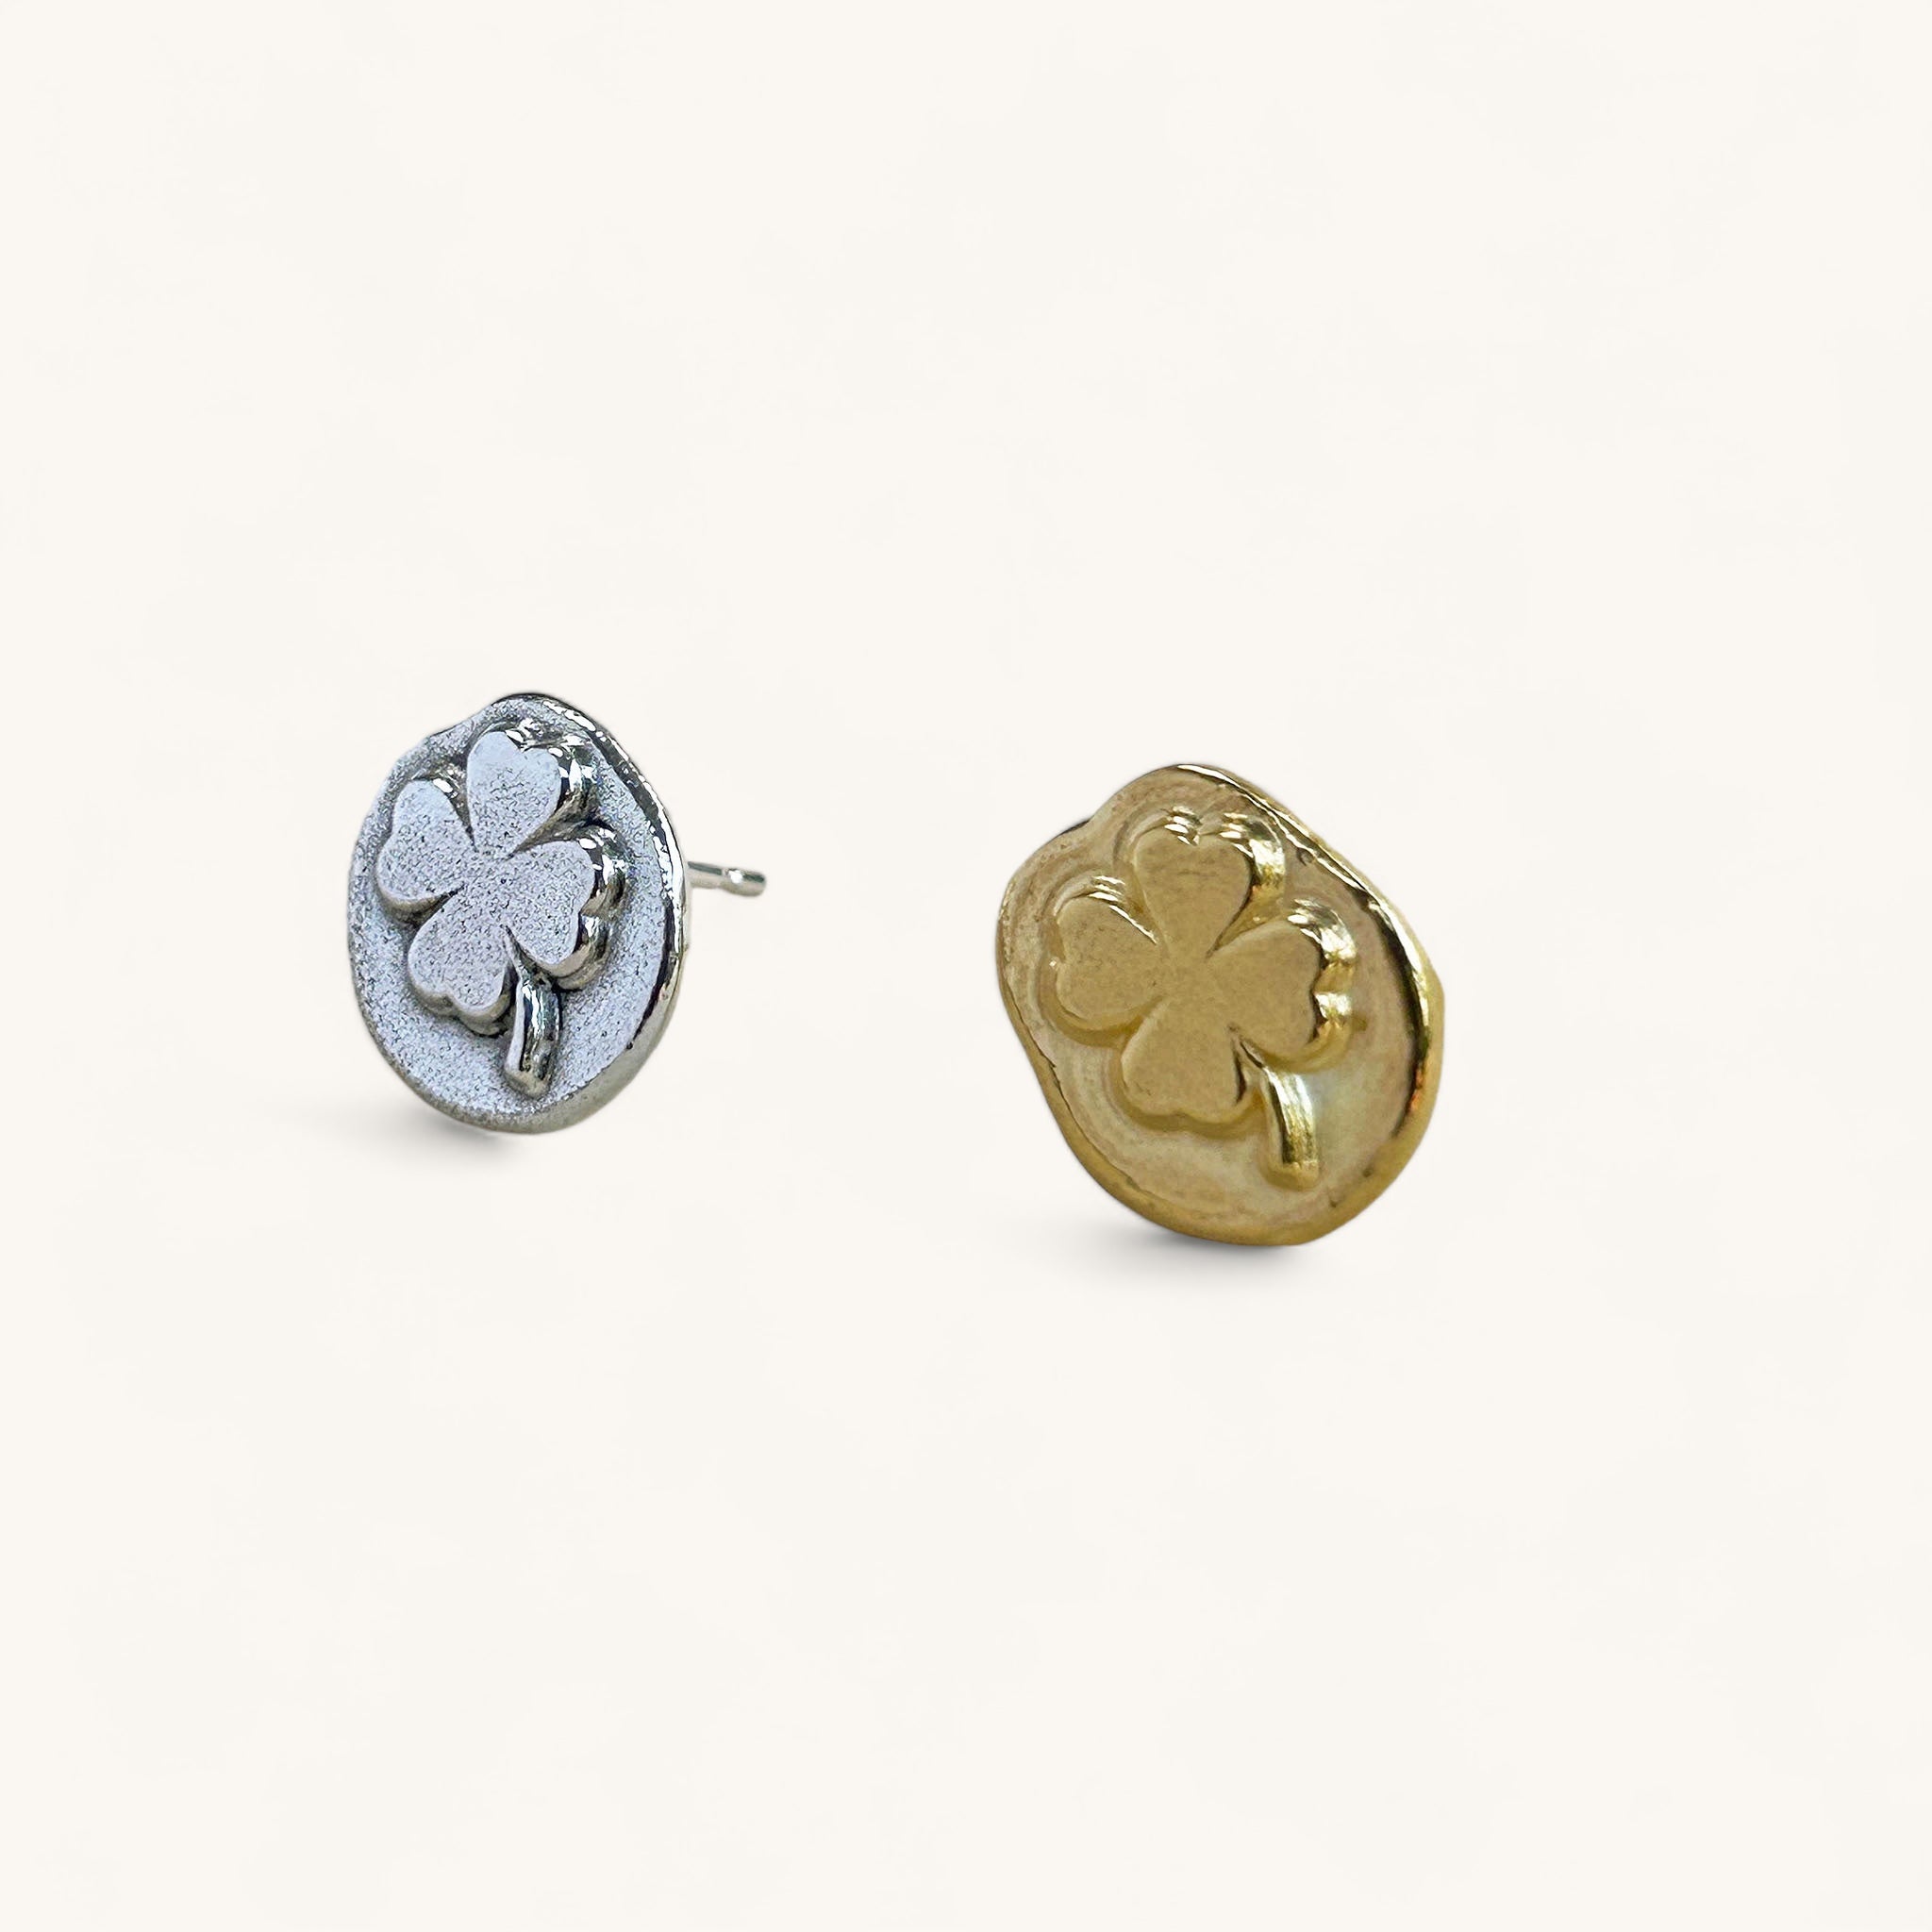 Jennifer Loiselle four leaf clover stud earrings in recycled silver and gold